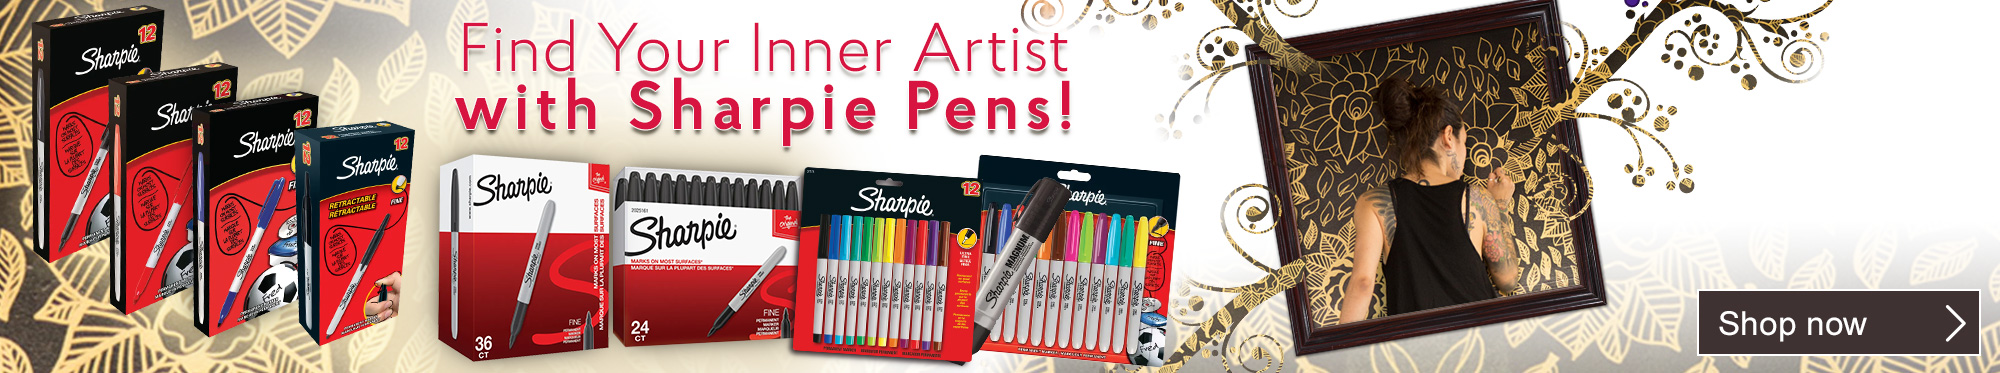 Find Your Inner Artist and Make Your Mark with Sharpie